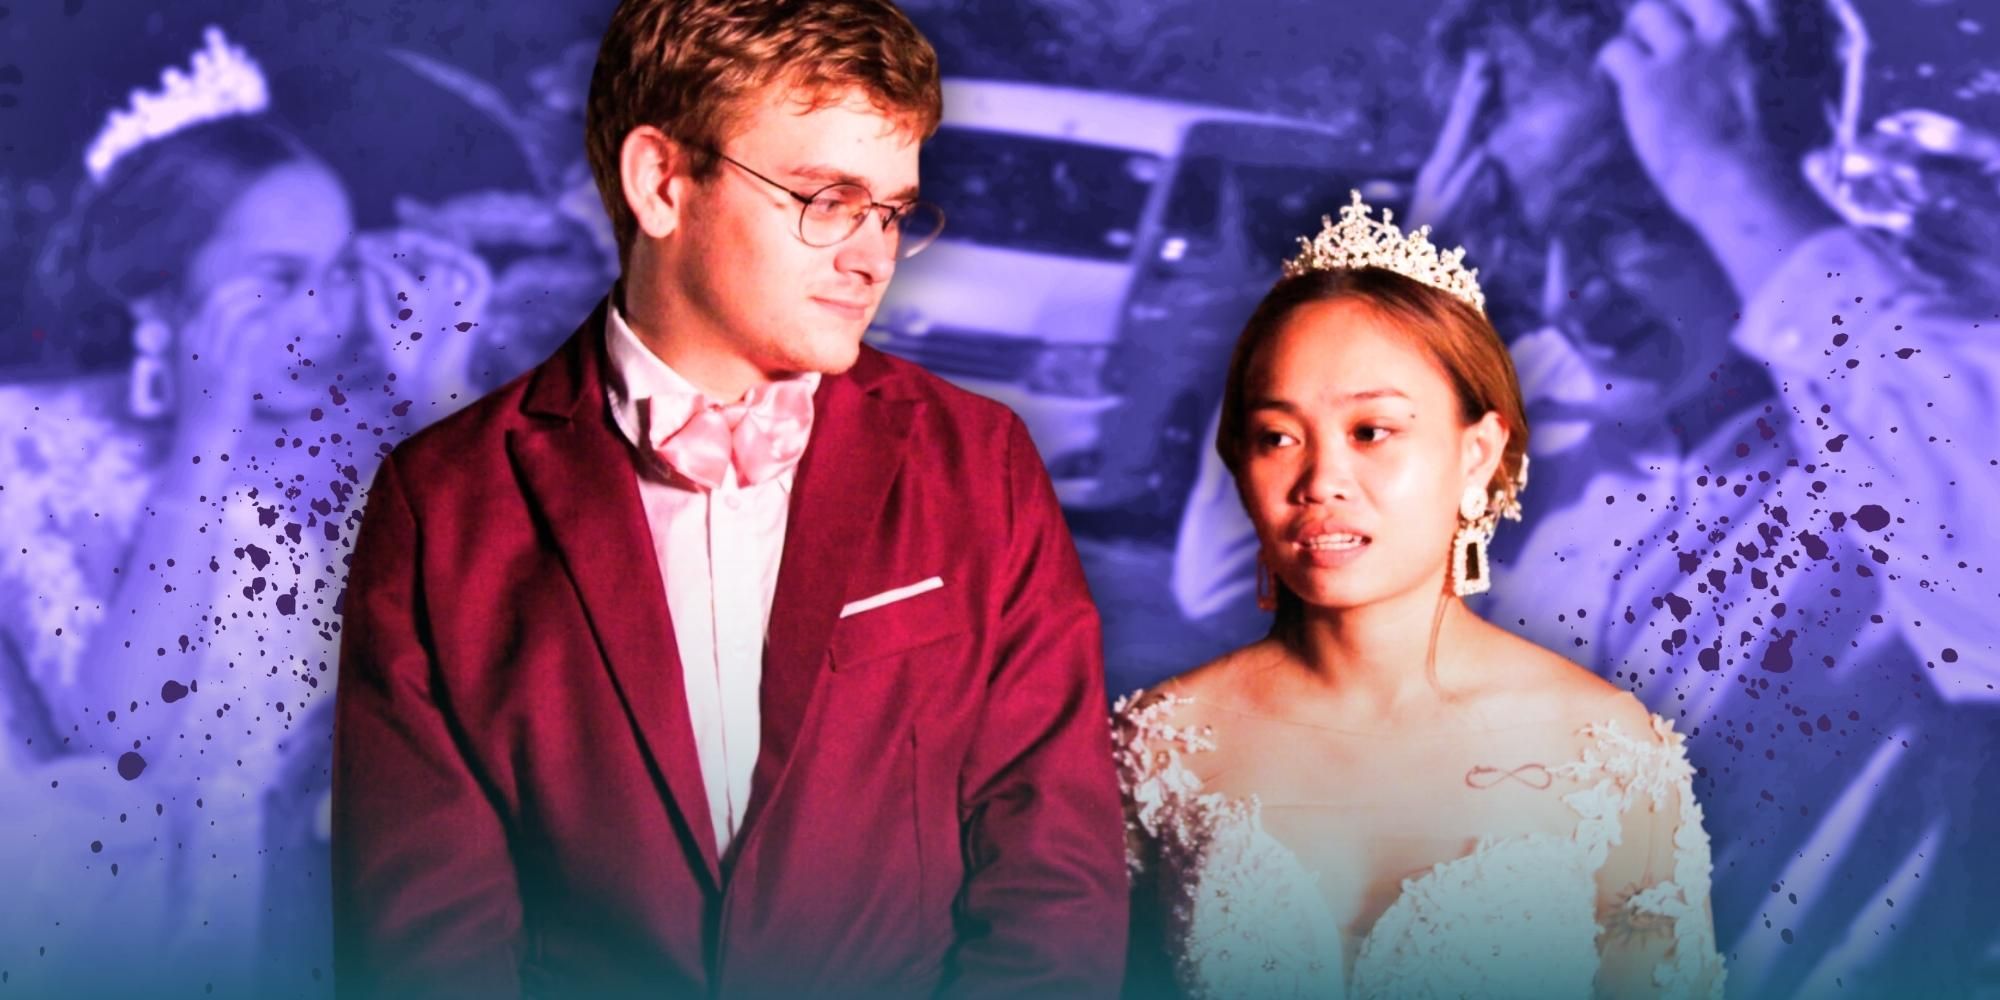 Montage of Mary & Brandan from 90 Day Fiance getting married